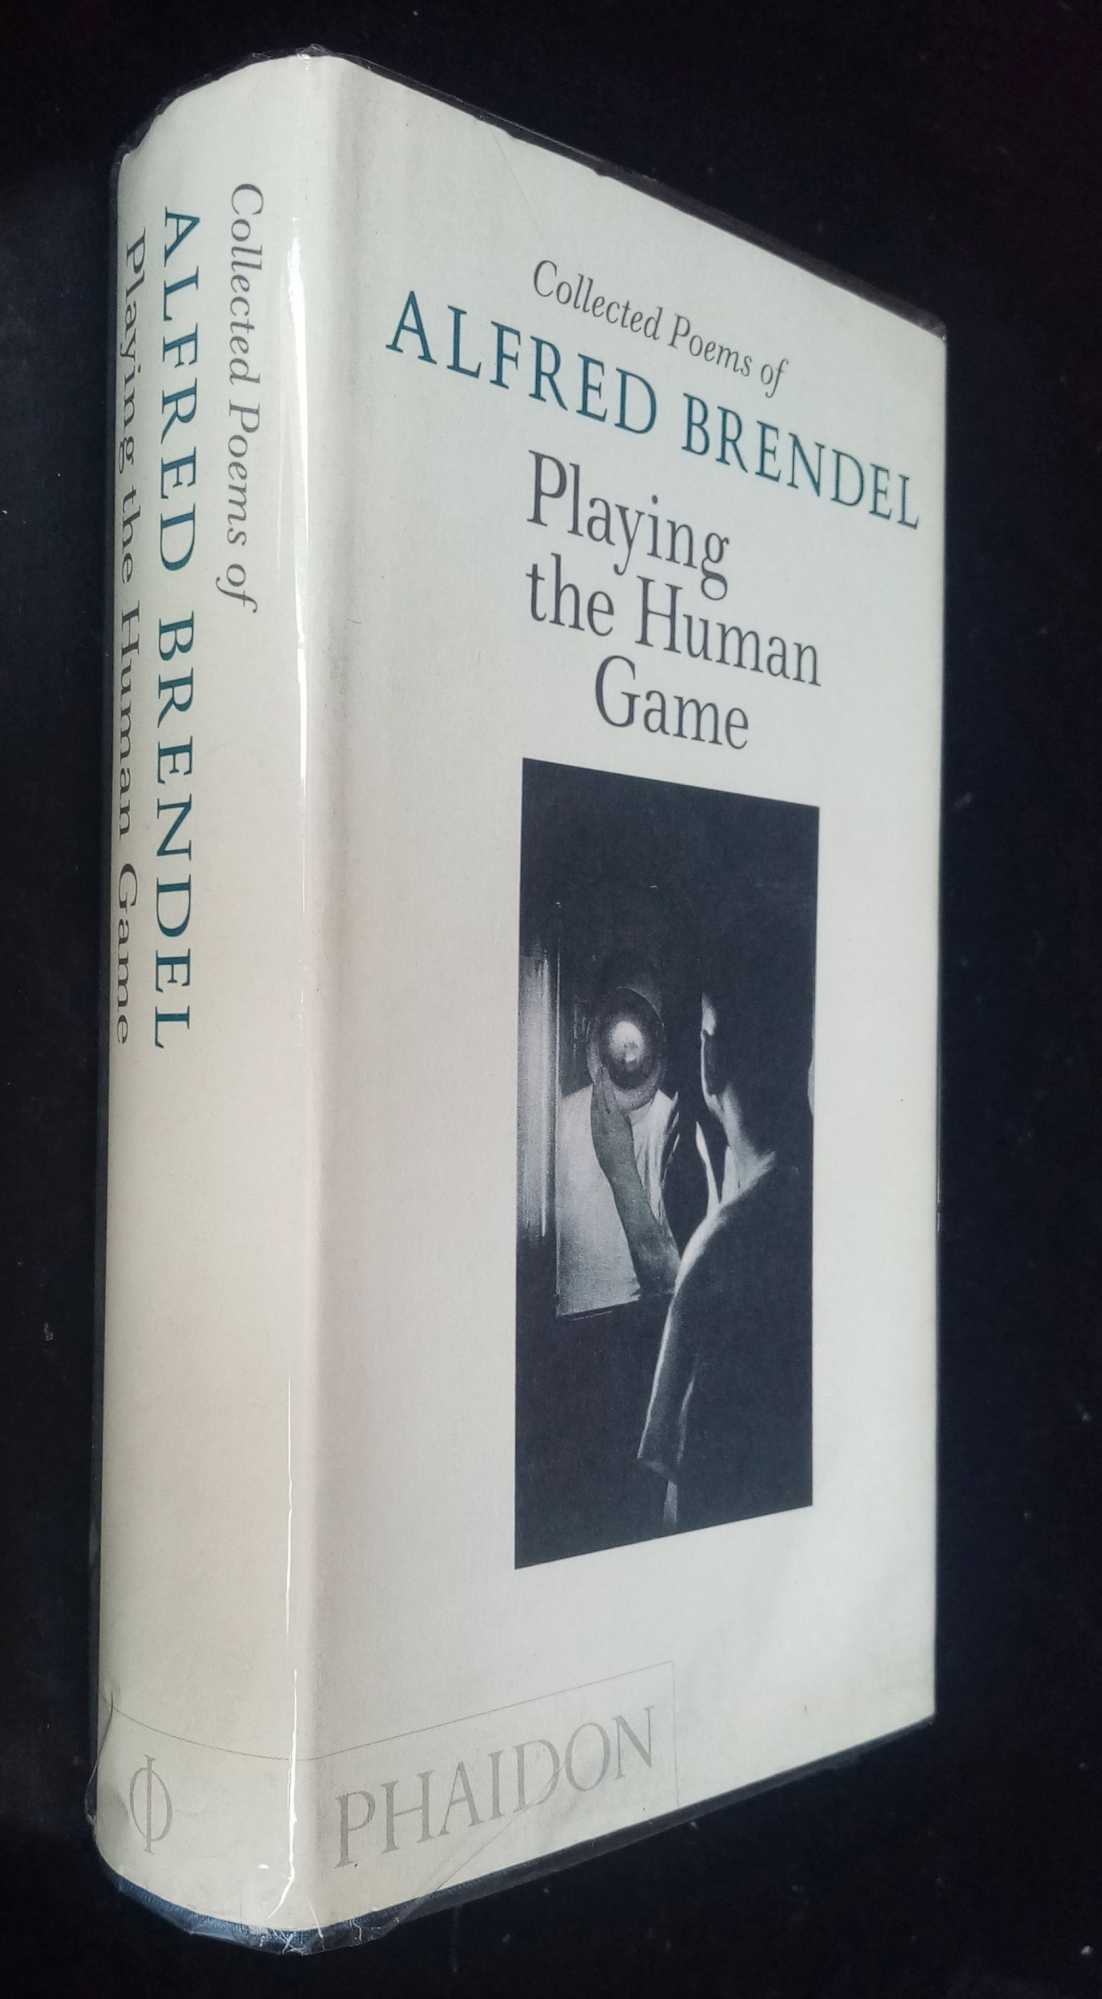 Alfred Brendel - Playing the Human Game: Collected Poems of Alfred Brendel